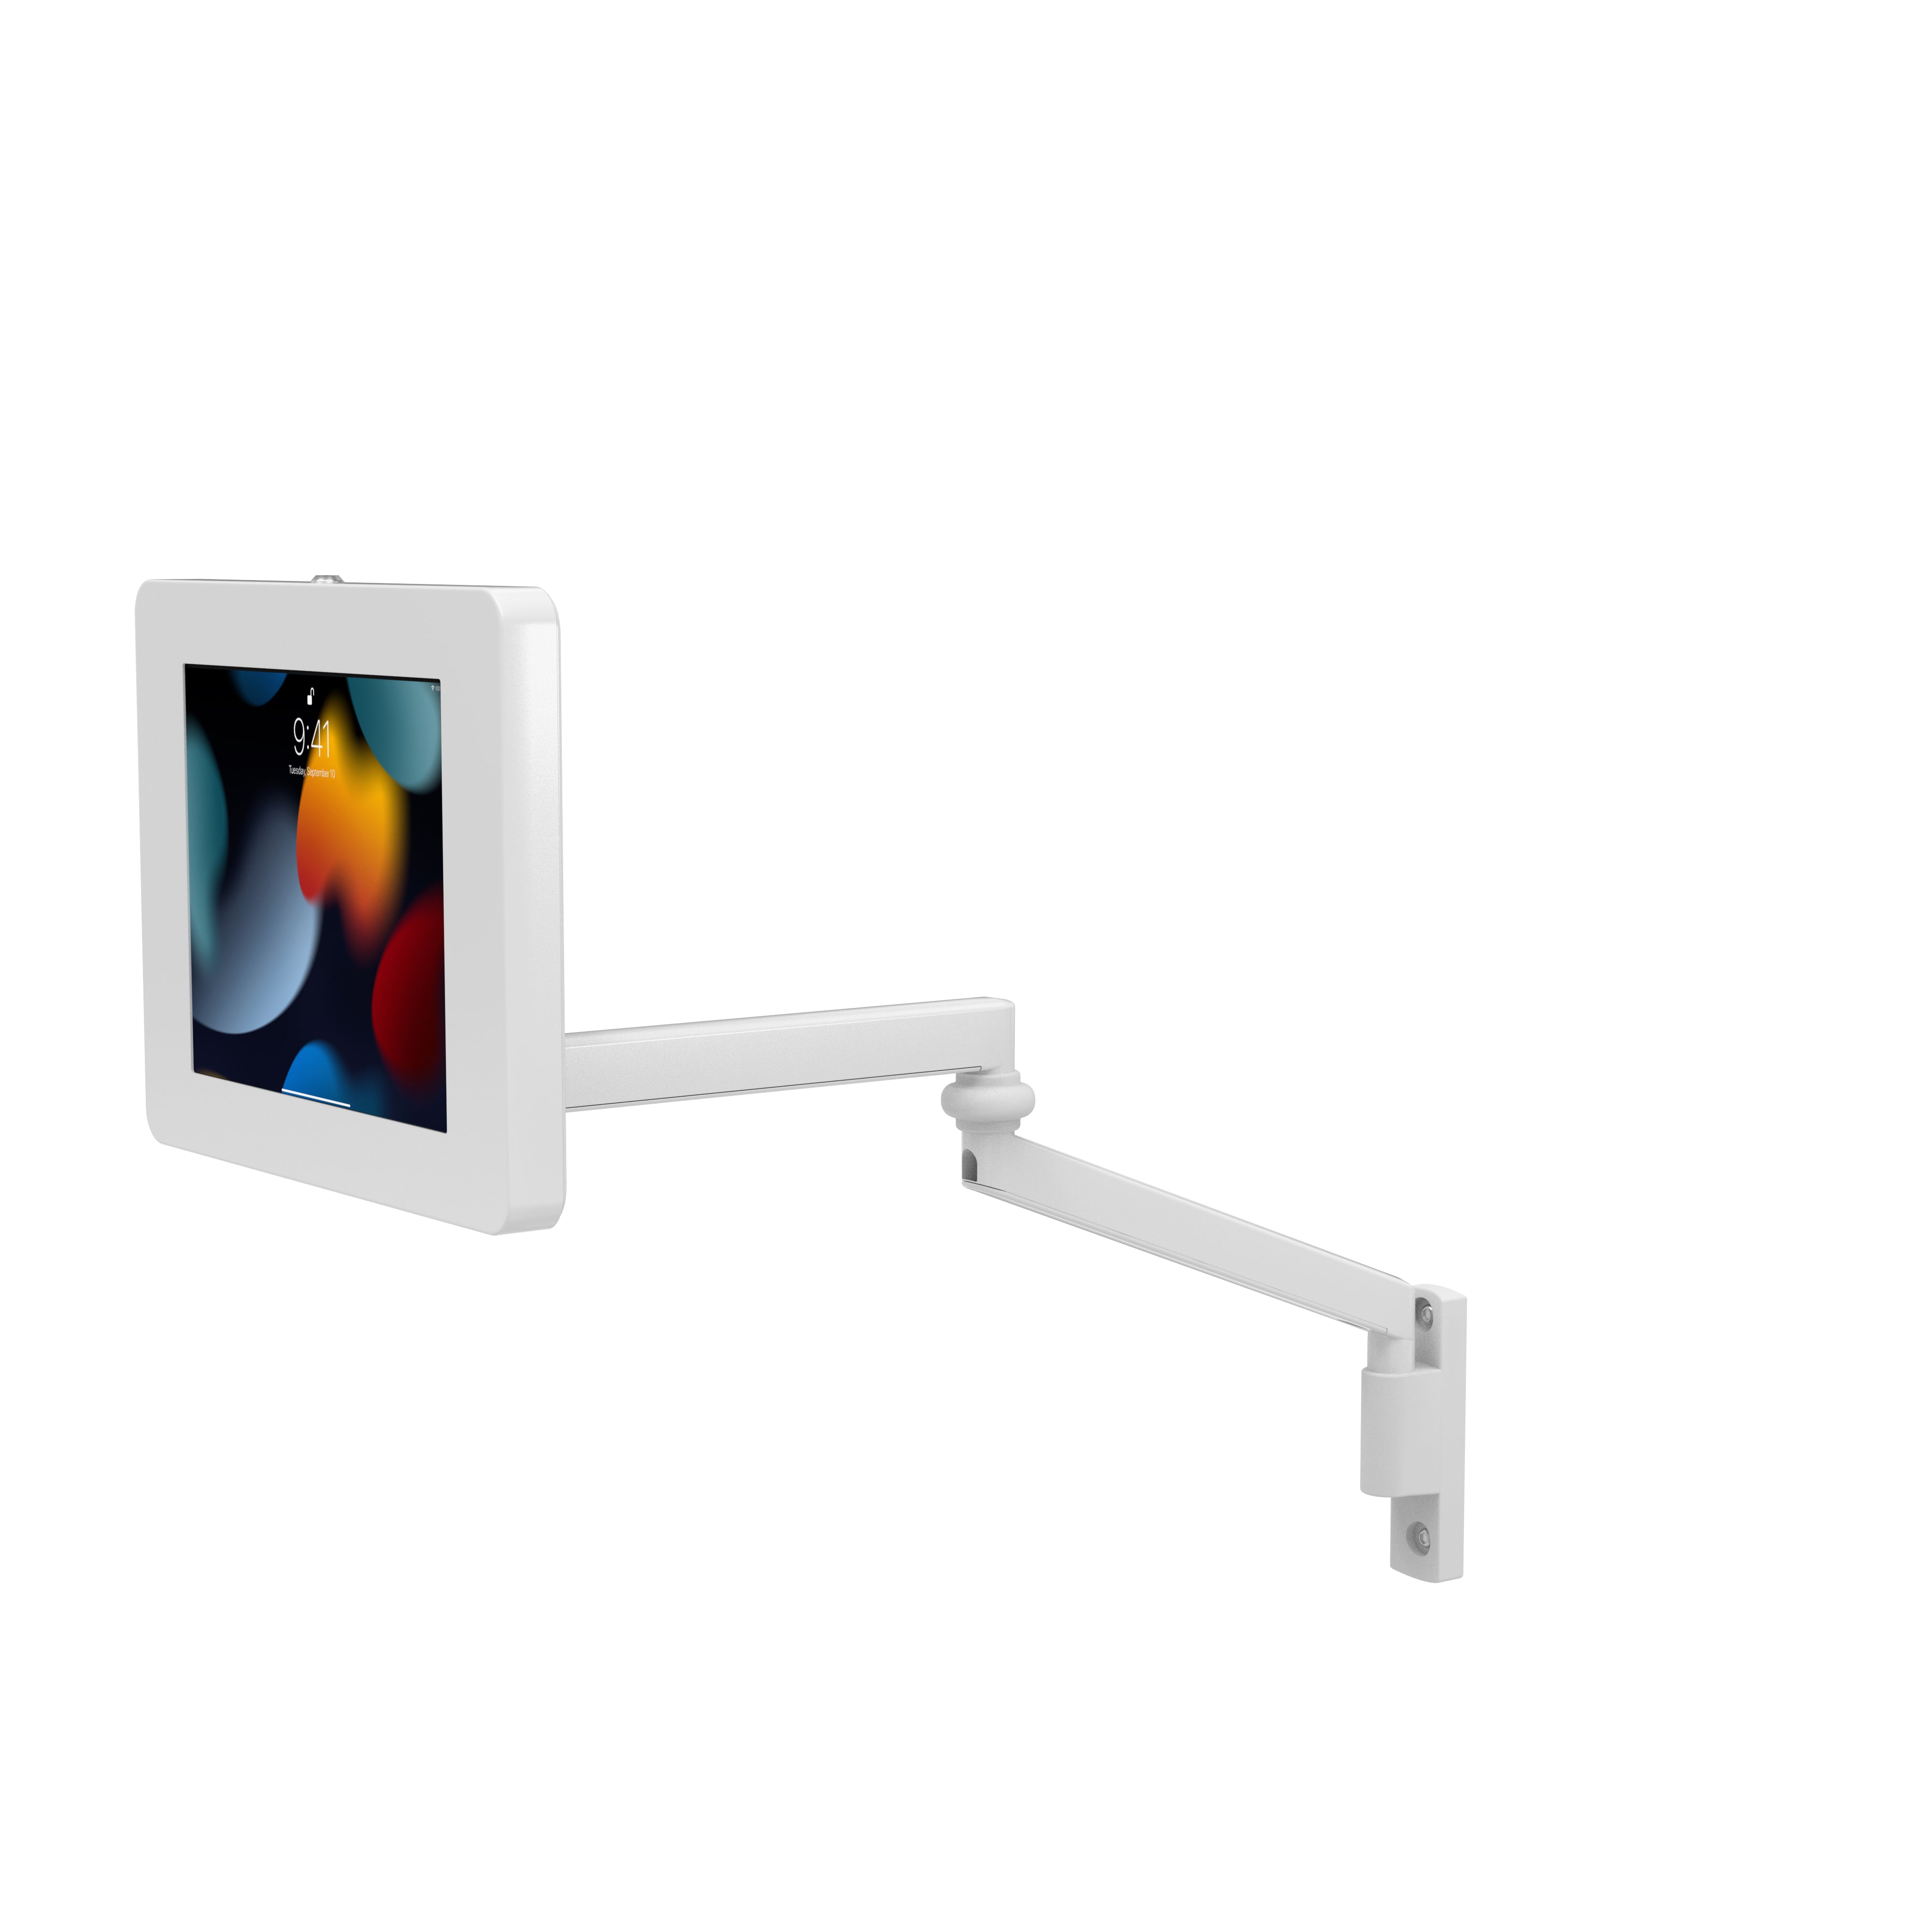 Medical Arm Wall Mount w/ Universal Security Enclosure for iPad Gen 7,8,9 & more